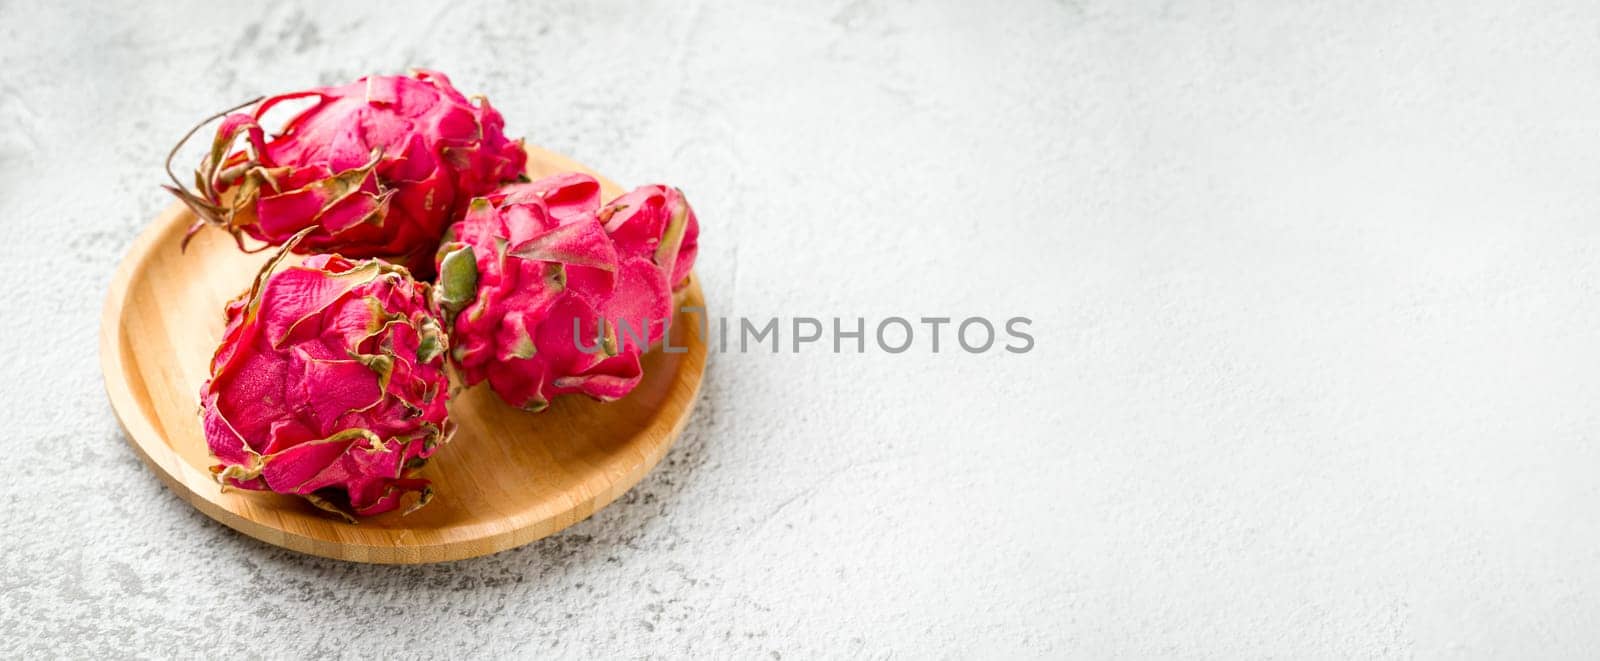 Ripe red dragon fruit on stone table by Sonat